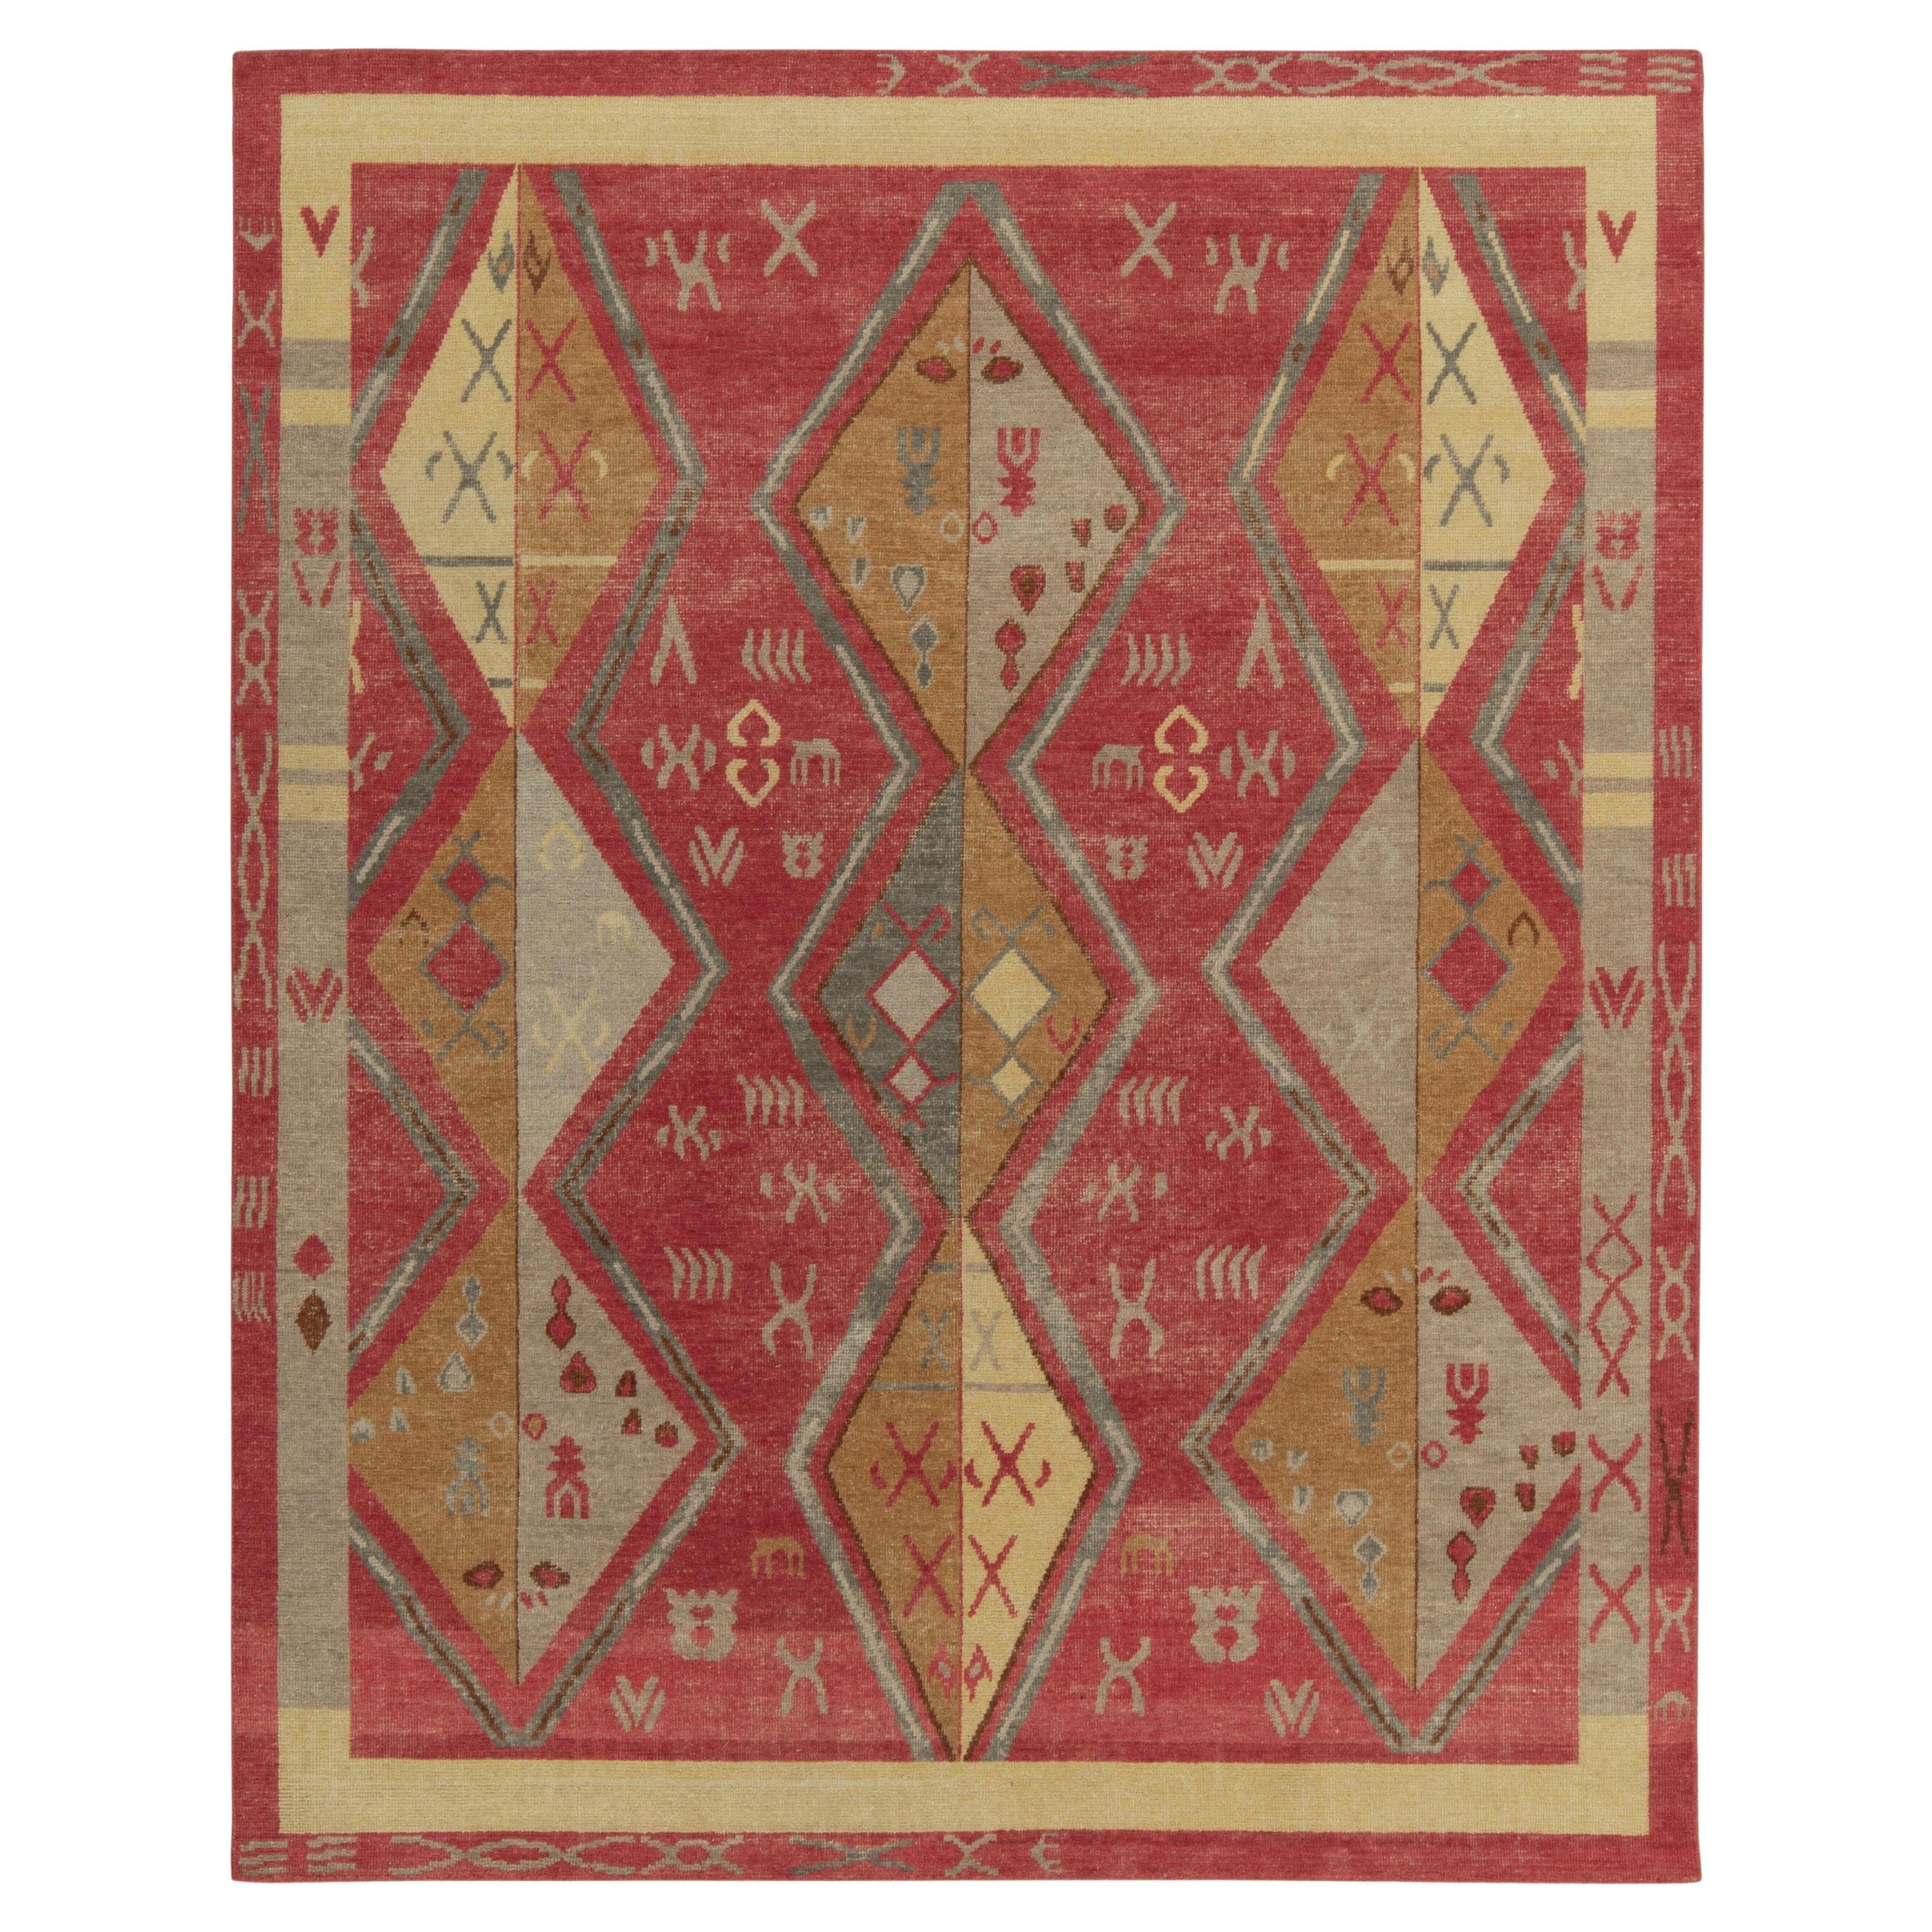 Rug & Kilim’s Distressed Yuruk Style Rug in Red, Beige & Gray Geometric Patterns For Sale